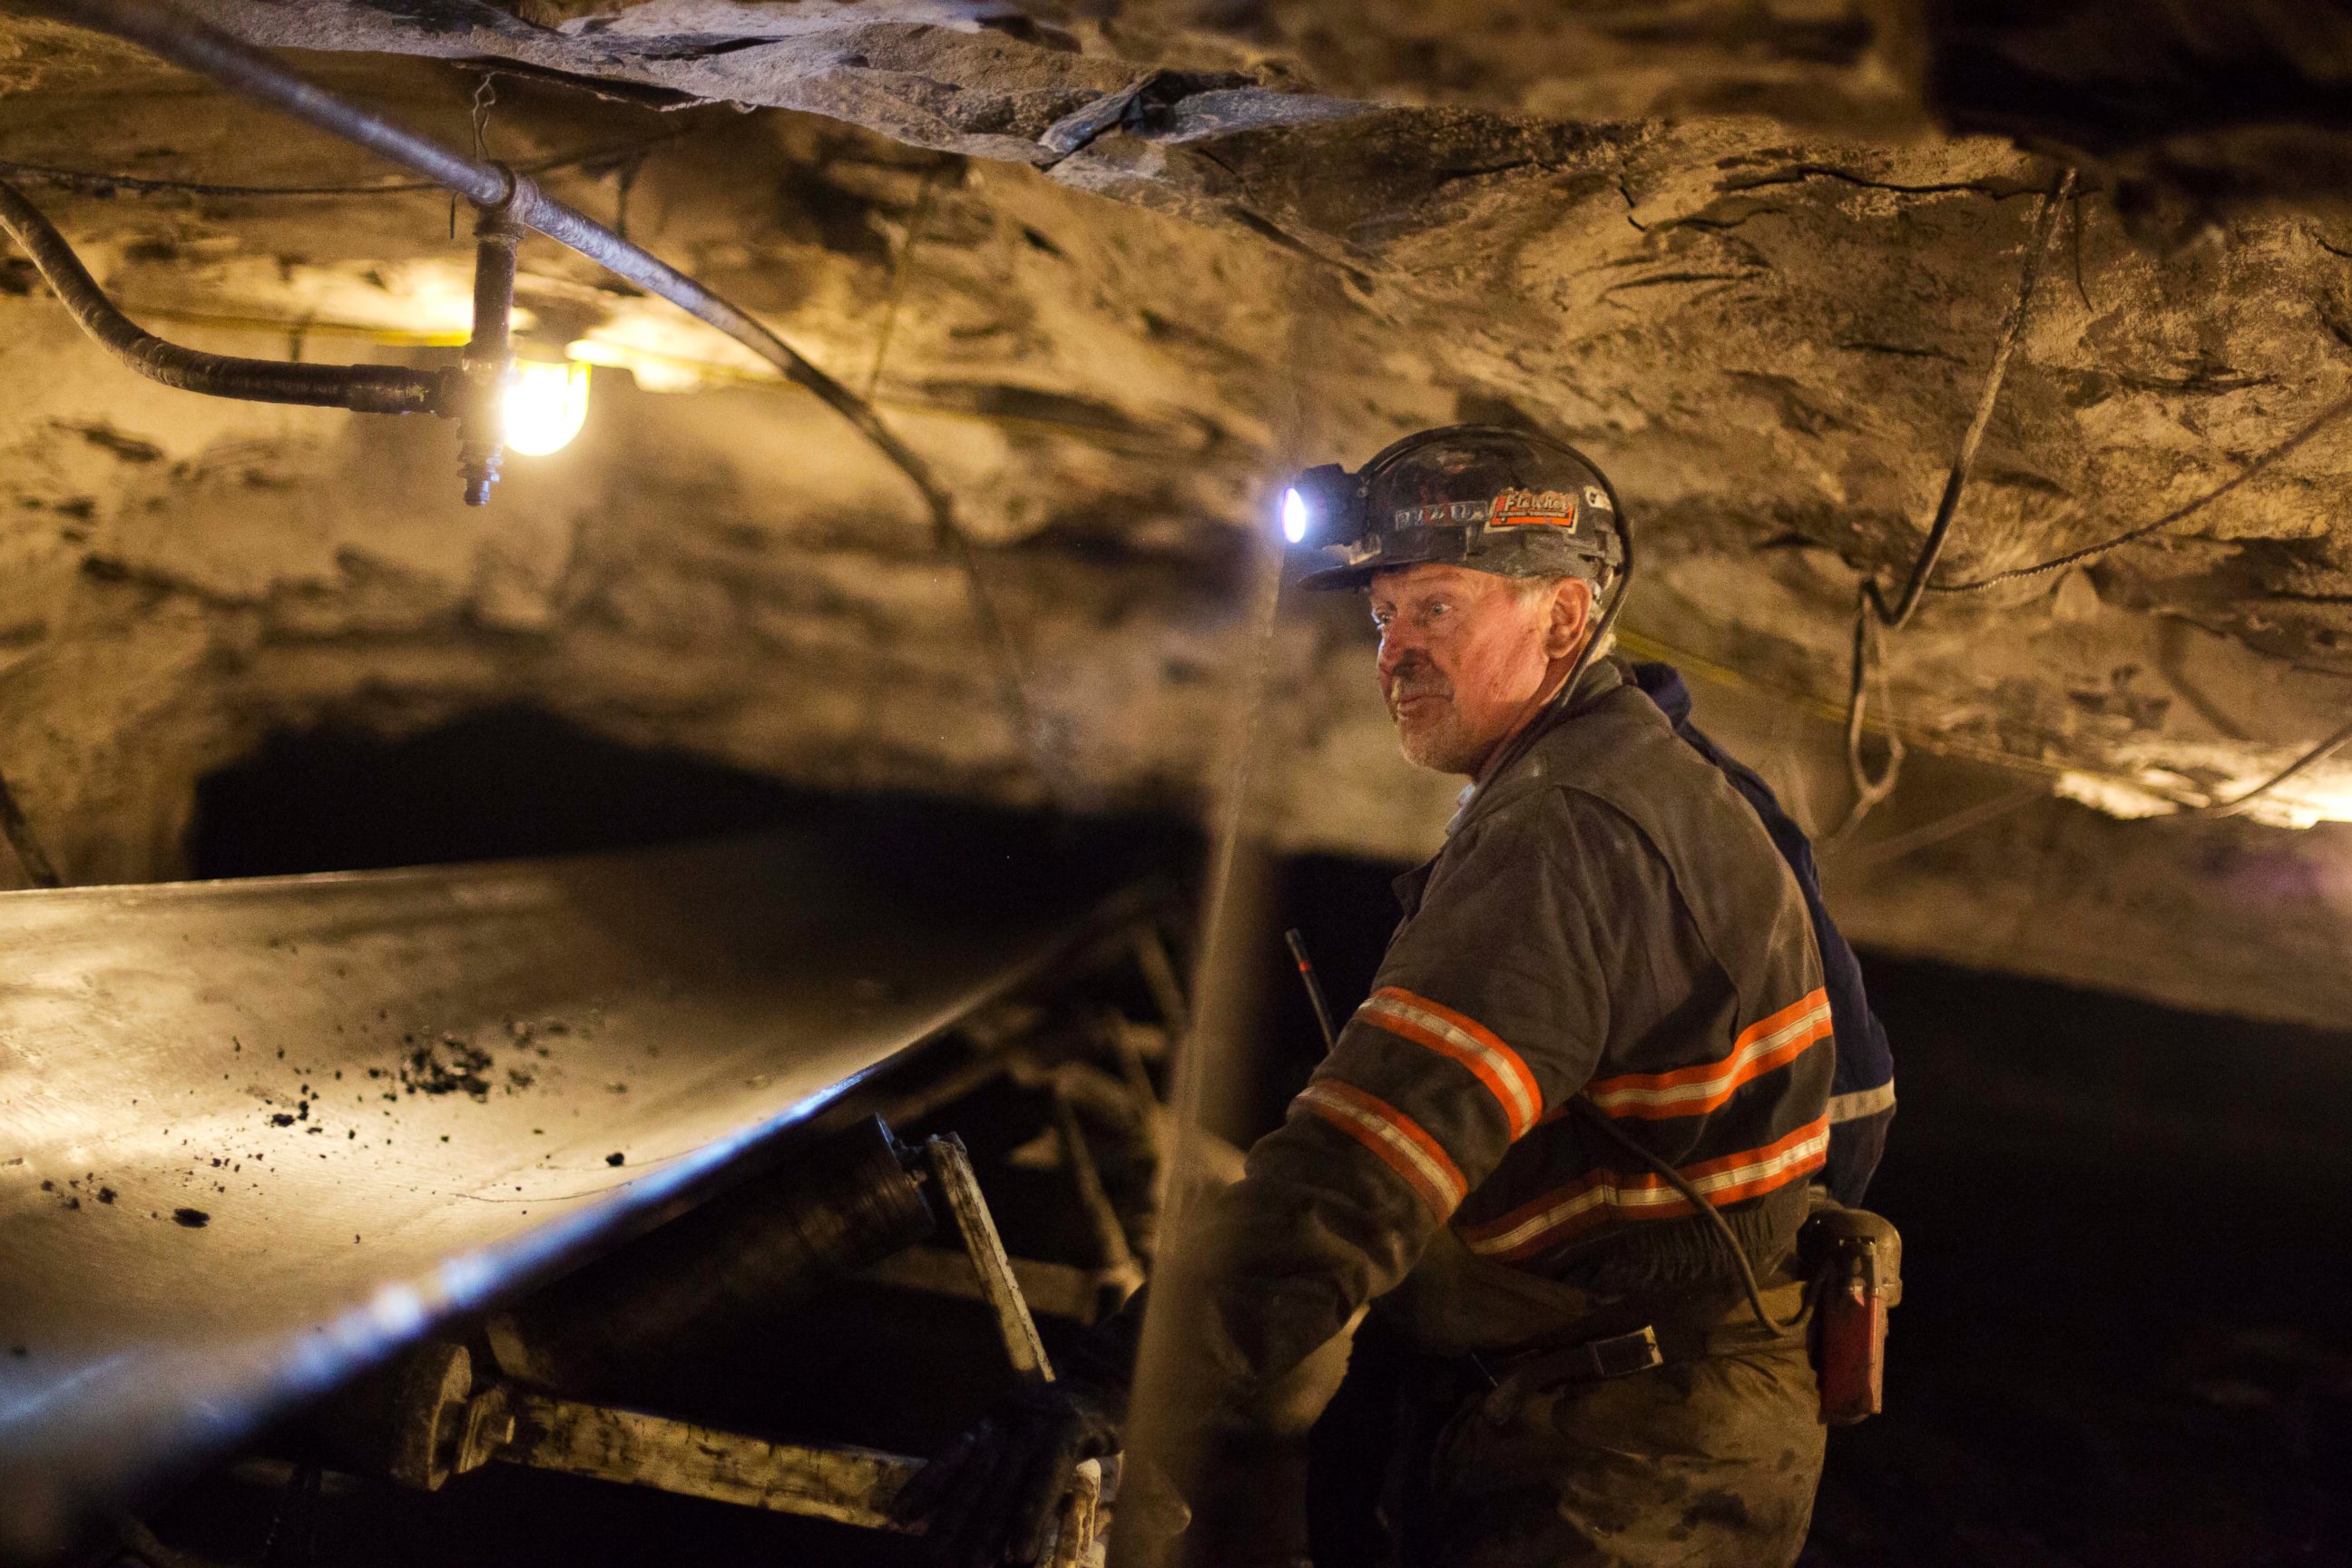 PHOTO: Scott Tiller, a coal miner of 32 years, looks over a belt moving coal out of an underground mine in Welch, W.Va on May 11, 2016.  